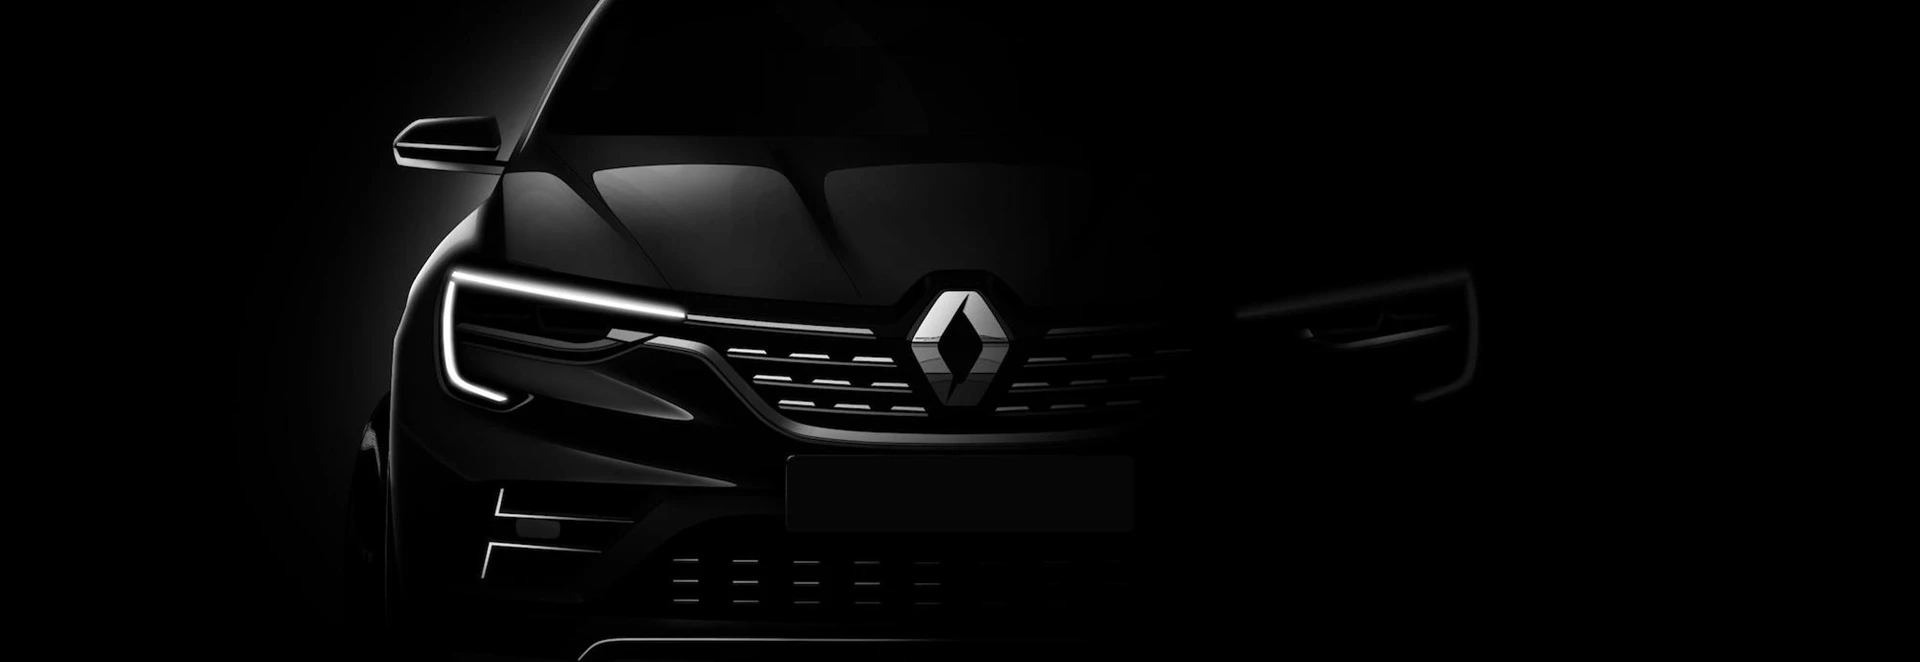 Renault teases all-new crossover